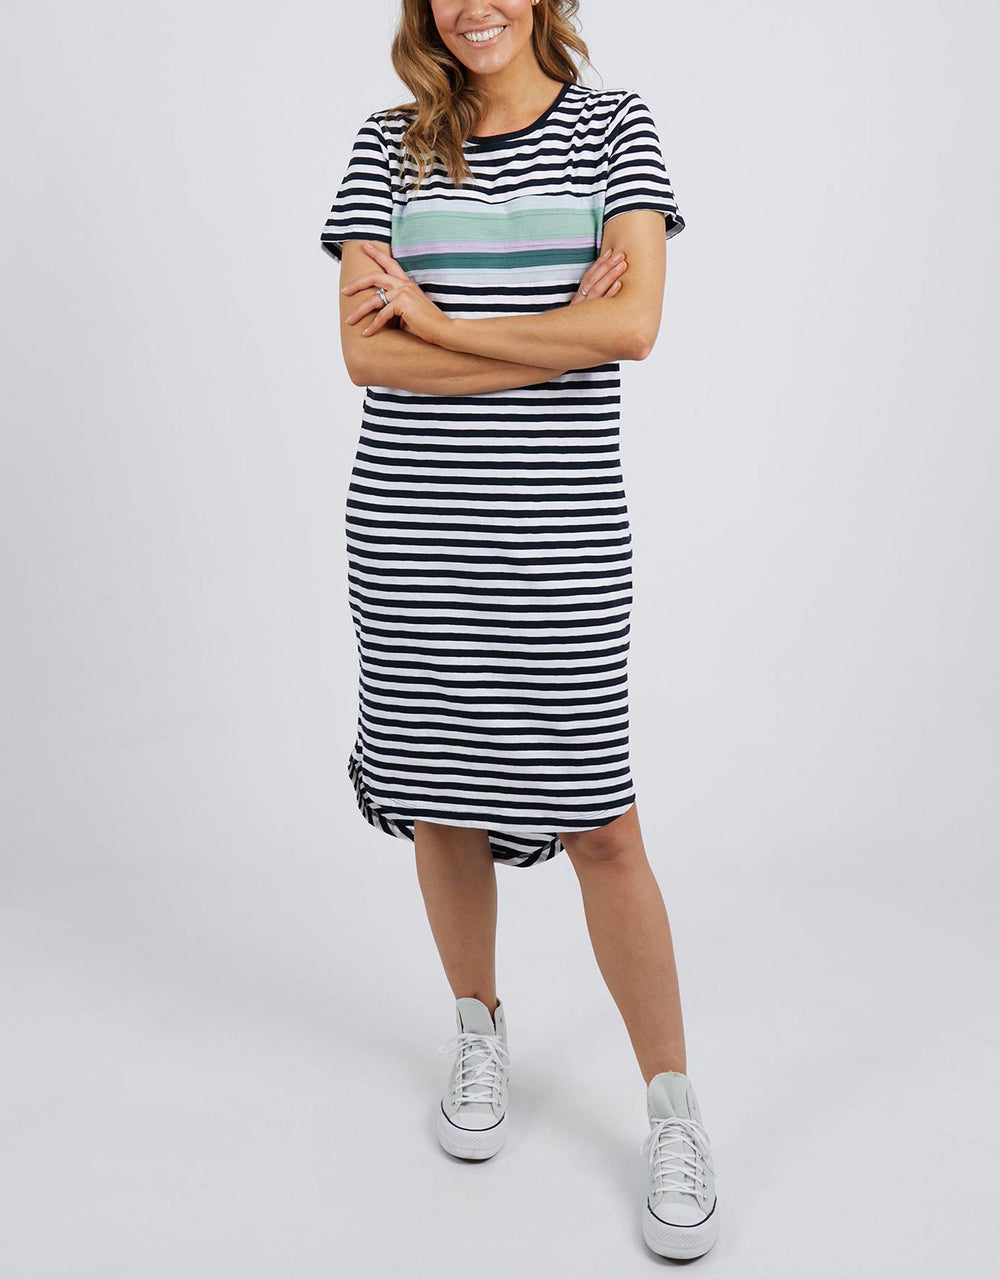 Time And Place Dress - Navy/White Stripe With Moss/Lilac